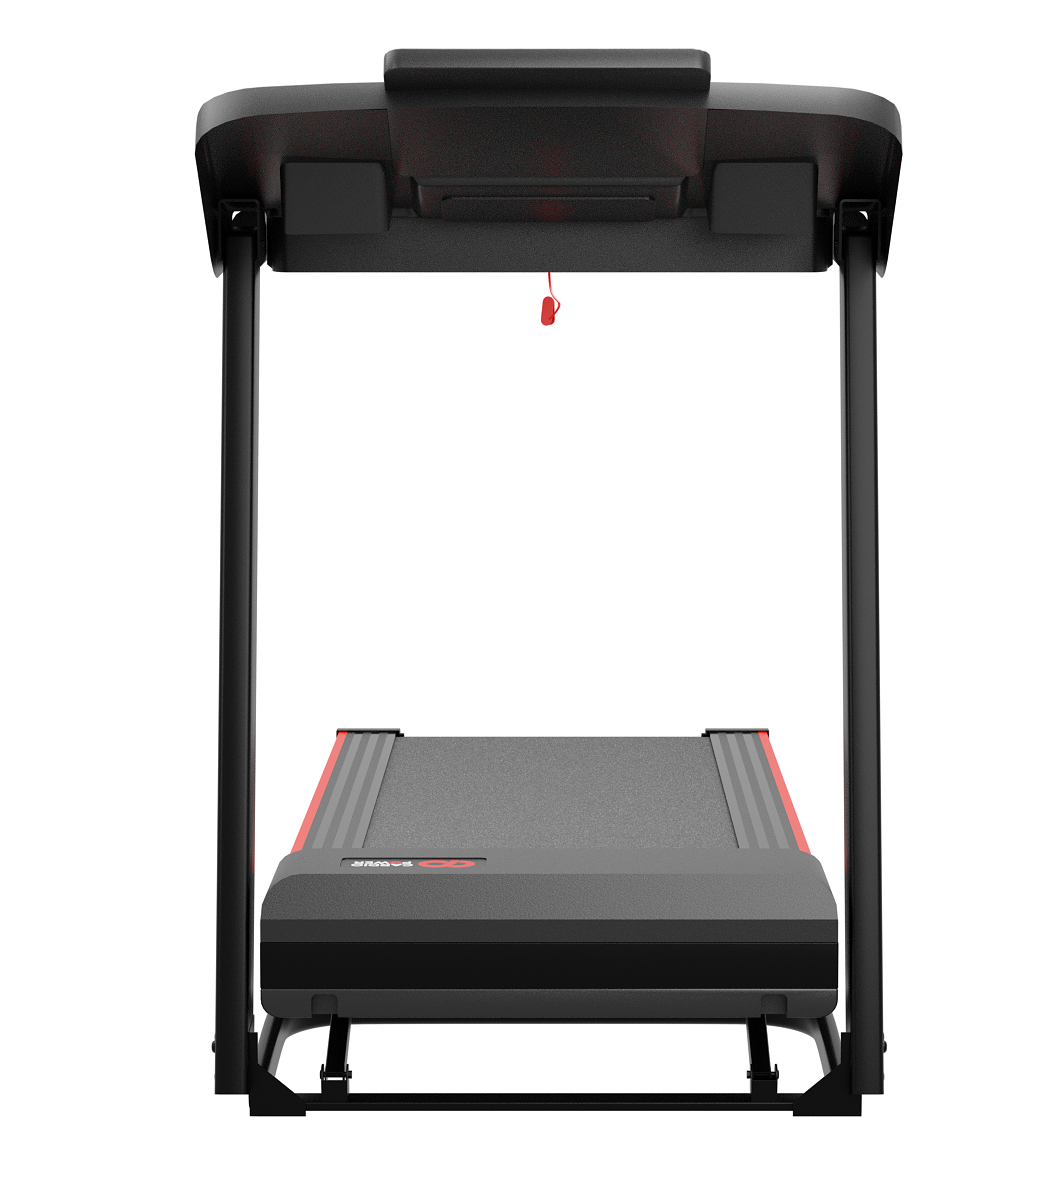 CardioPower T25 preview 6